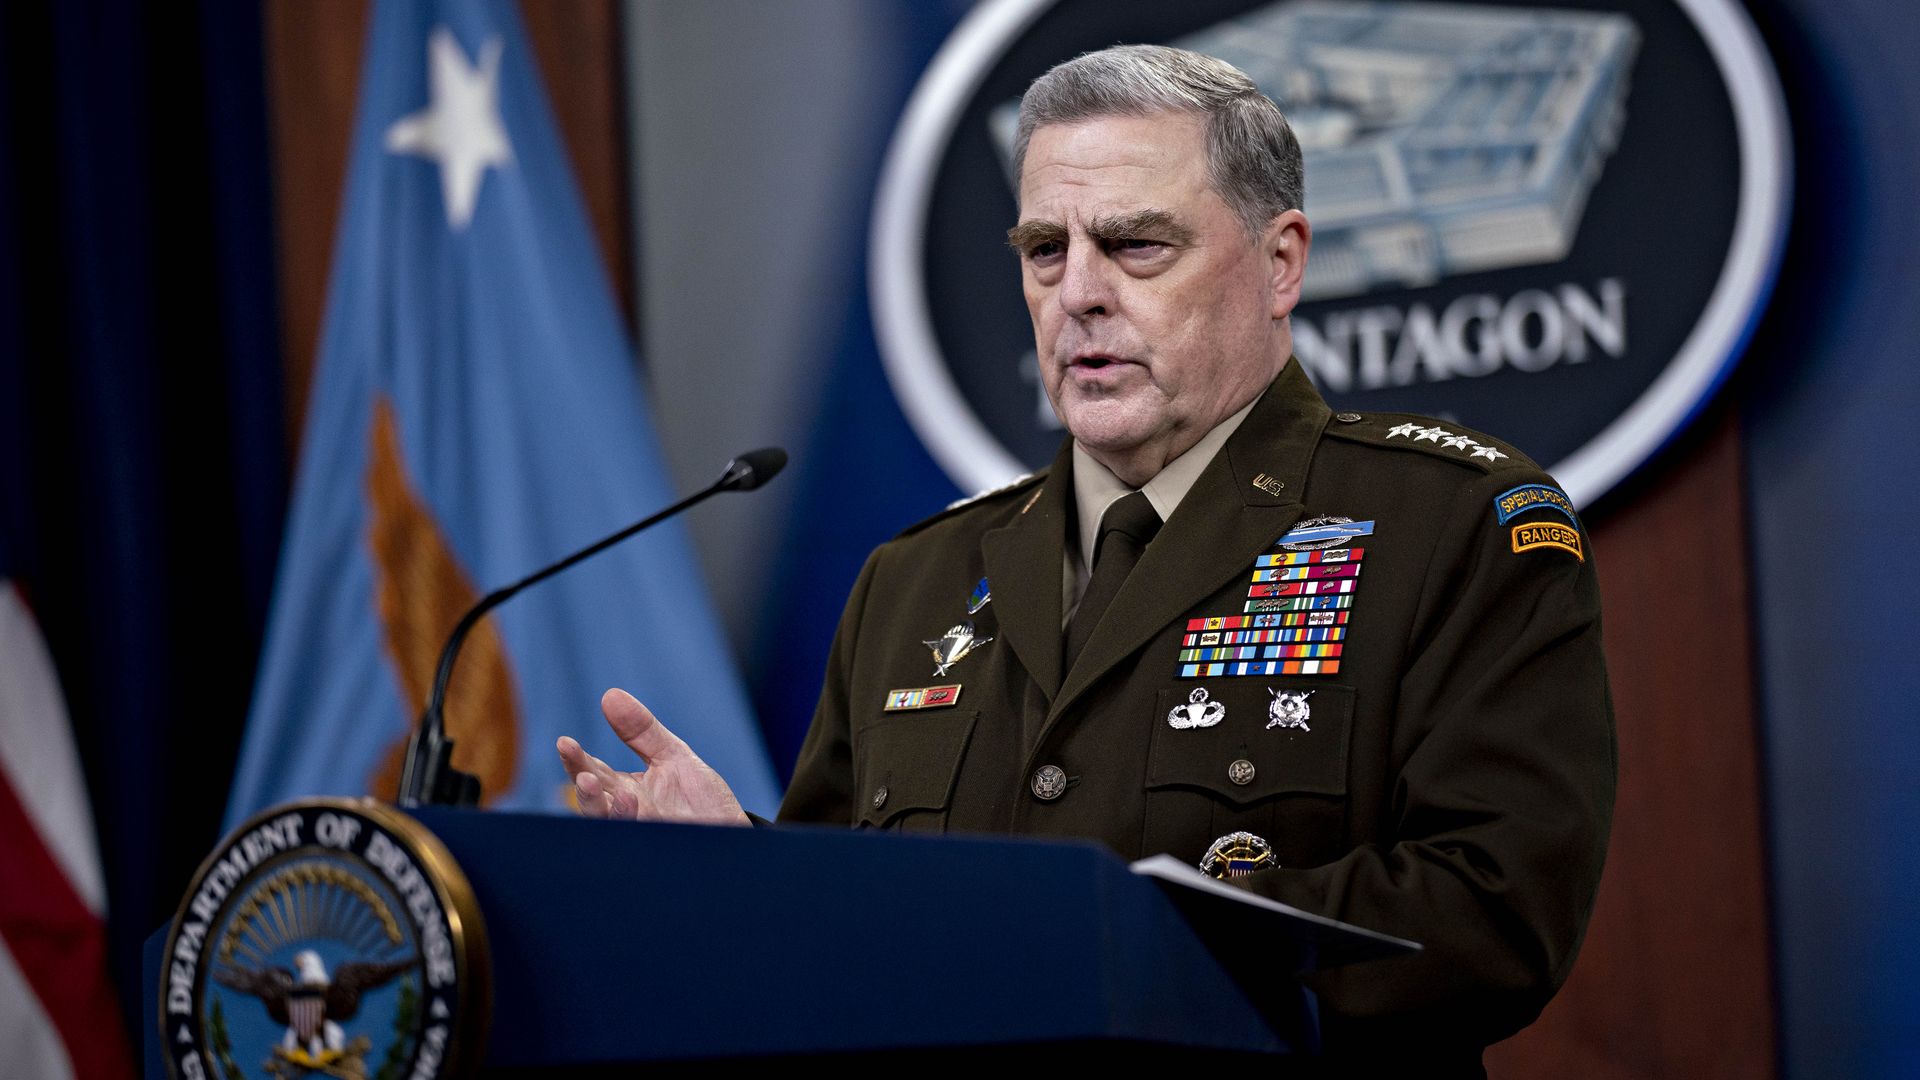 Mark Milley, chair of the joint chiefs of staff, speaks during a news conference at the Pentagon in Arlington, Virginia, U.S., on Wednesday, Sept. 1